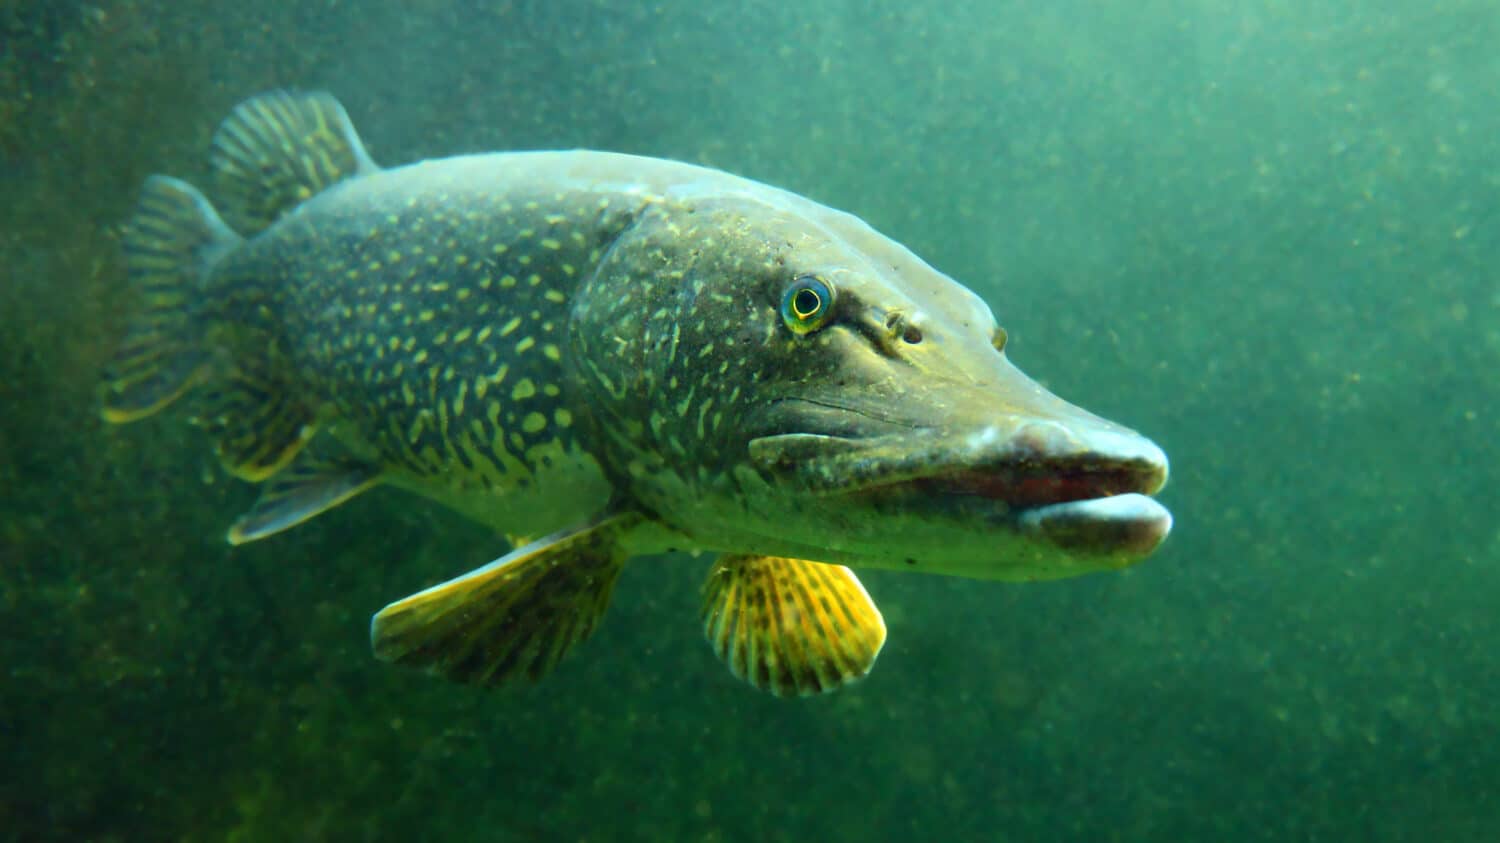 The Northern Pike - Esox Lucius. Underwater photo of giant fish from freshwater lake. Animals and wildlife theme.